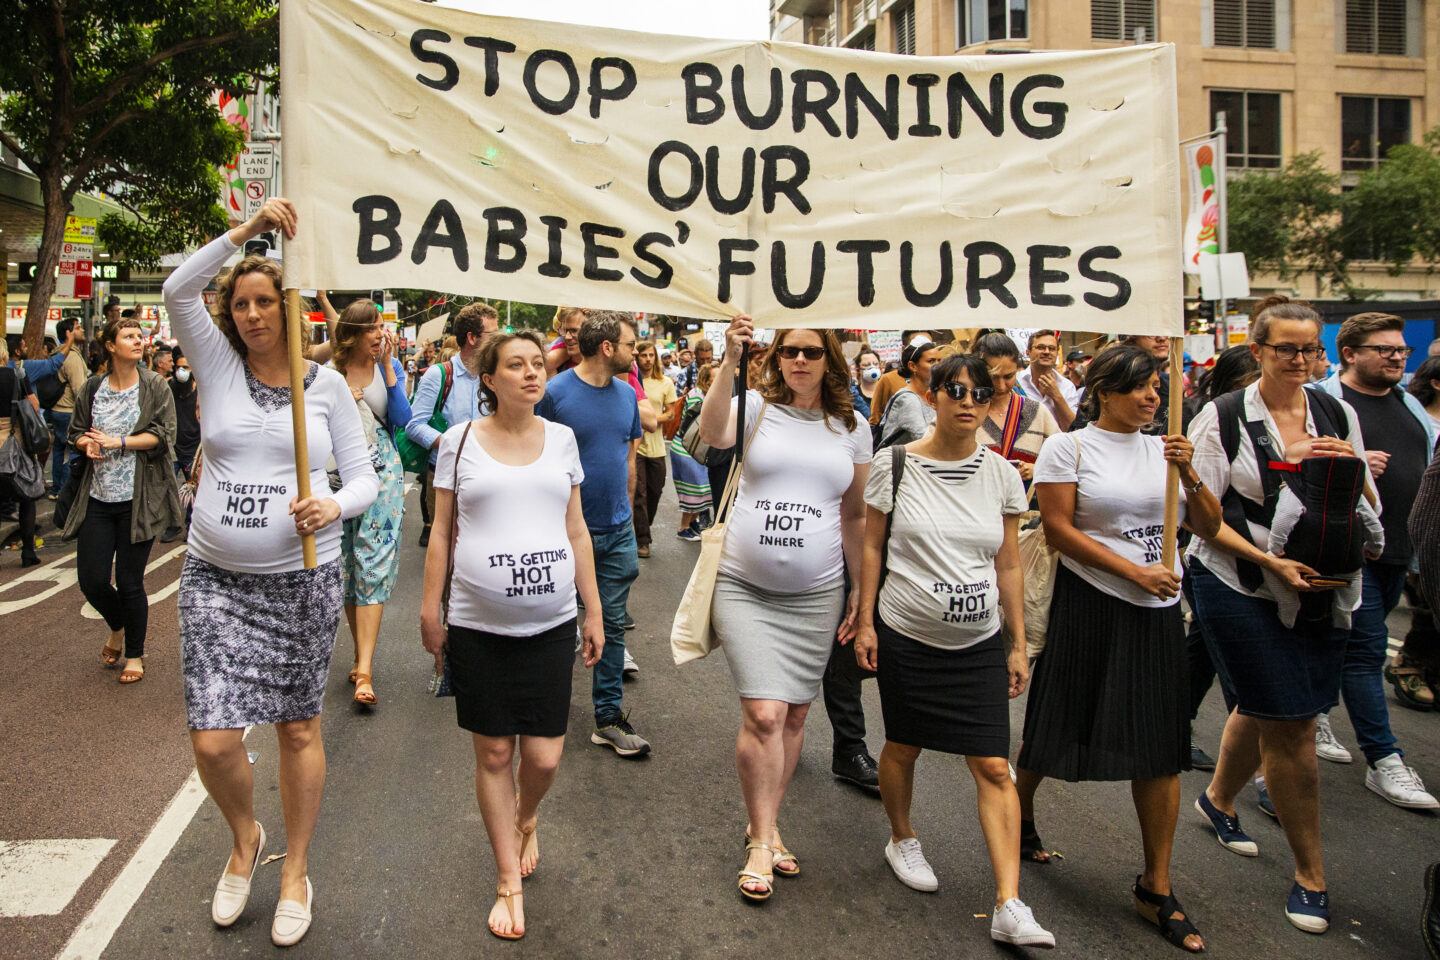 “I’m a Climate Scientist: Here’s How Climate Change Directly Impacts Mothers and Babies”